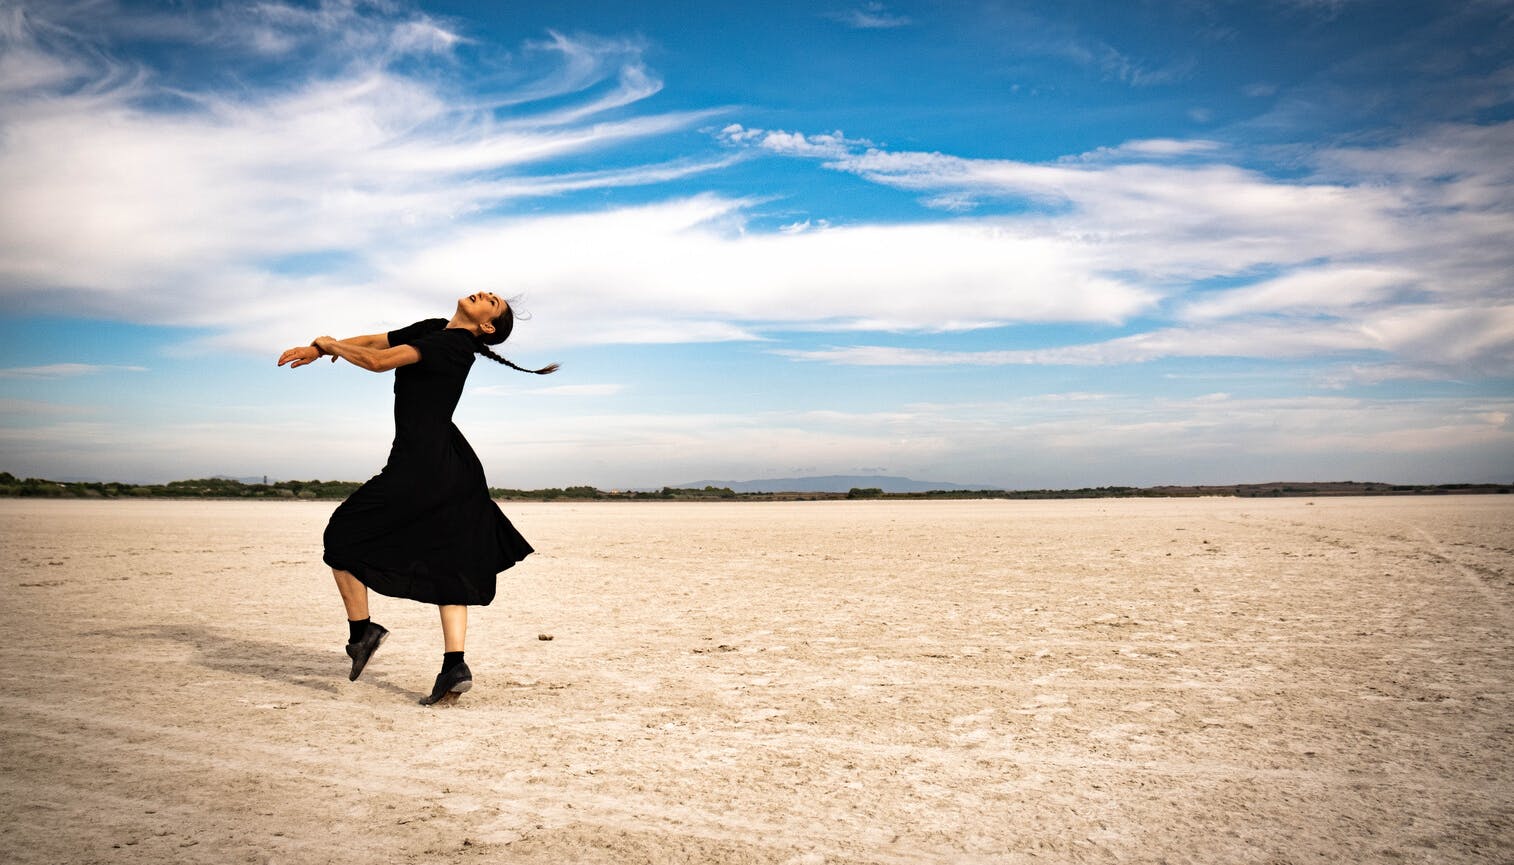 A dancer is dancing on a beach. She stretches her arms forward while extending her head back.